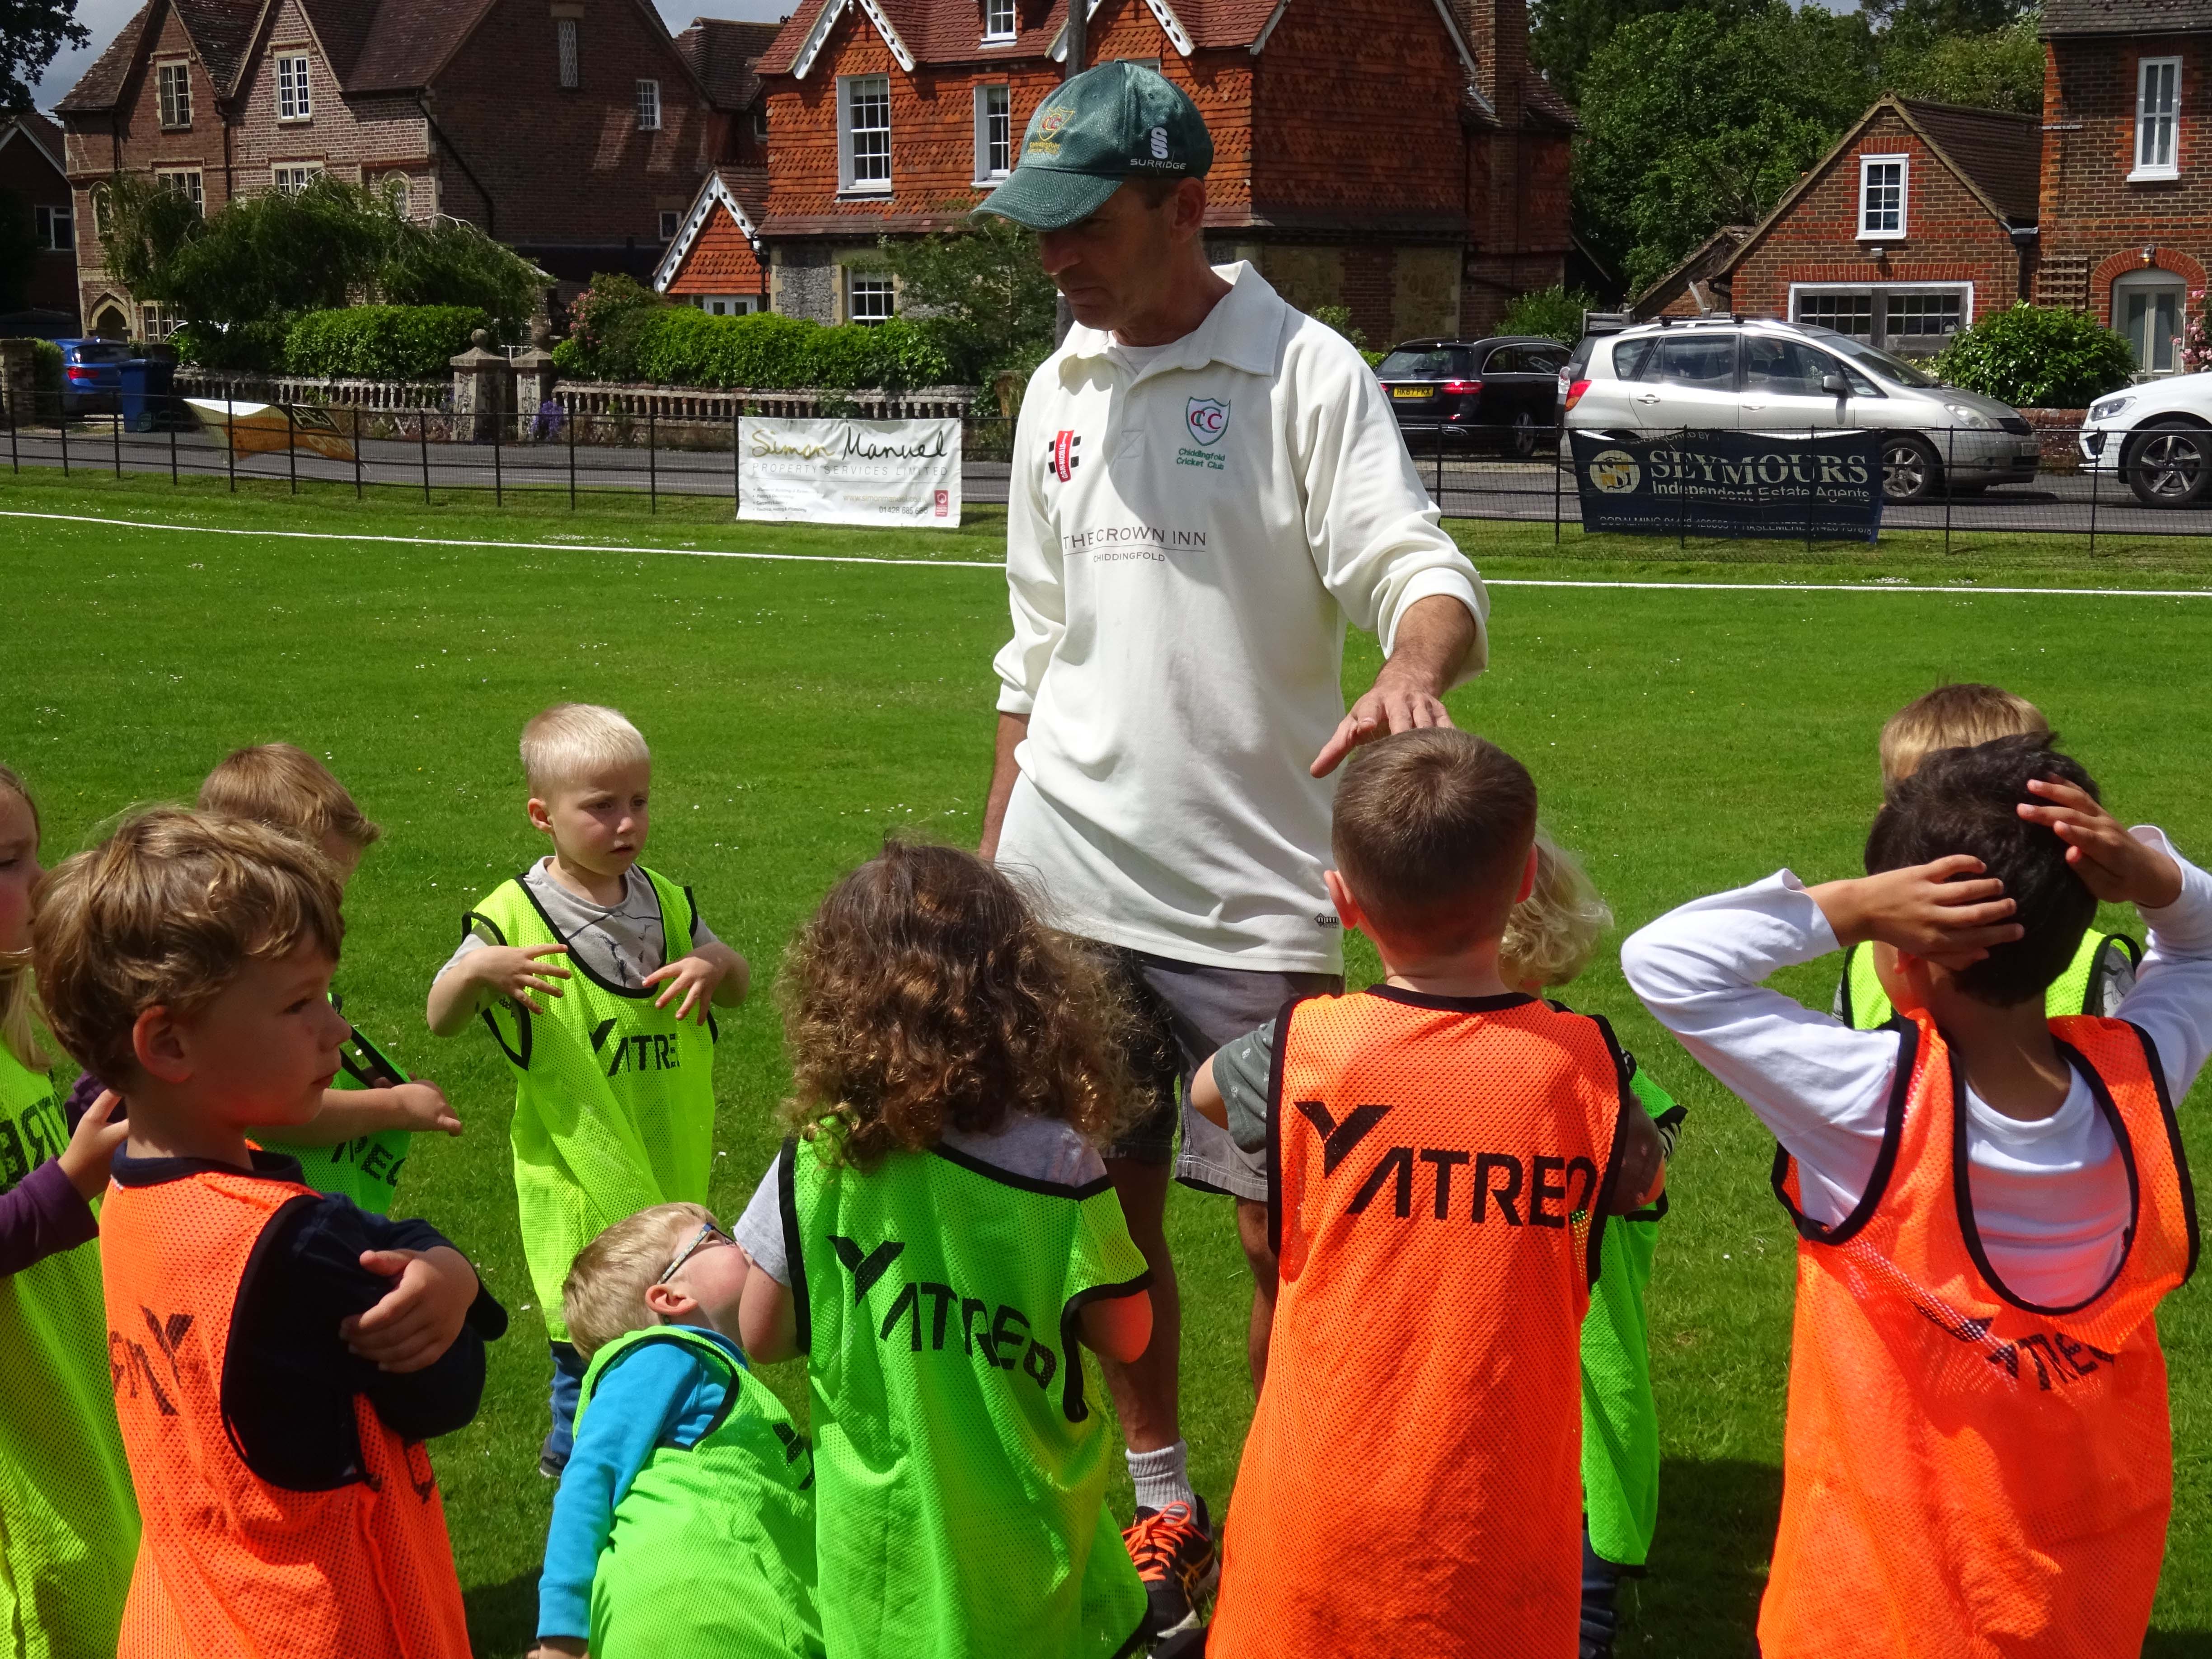 Seymours-Haslemere-Support-Cricket-coaching